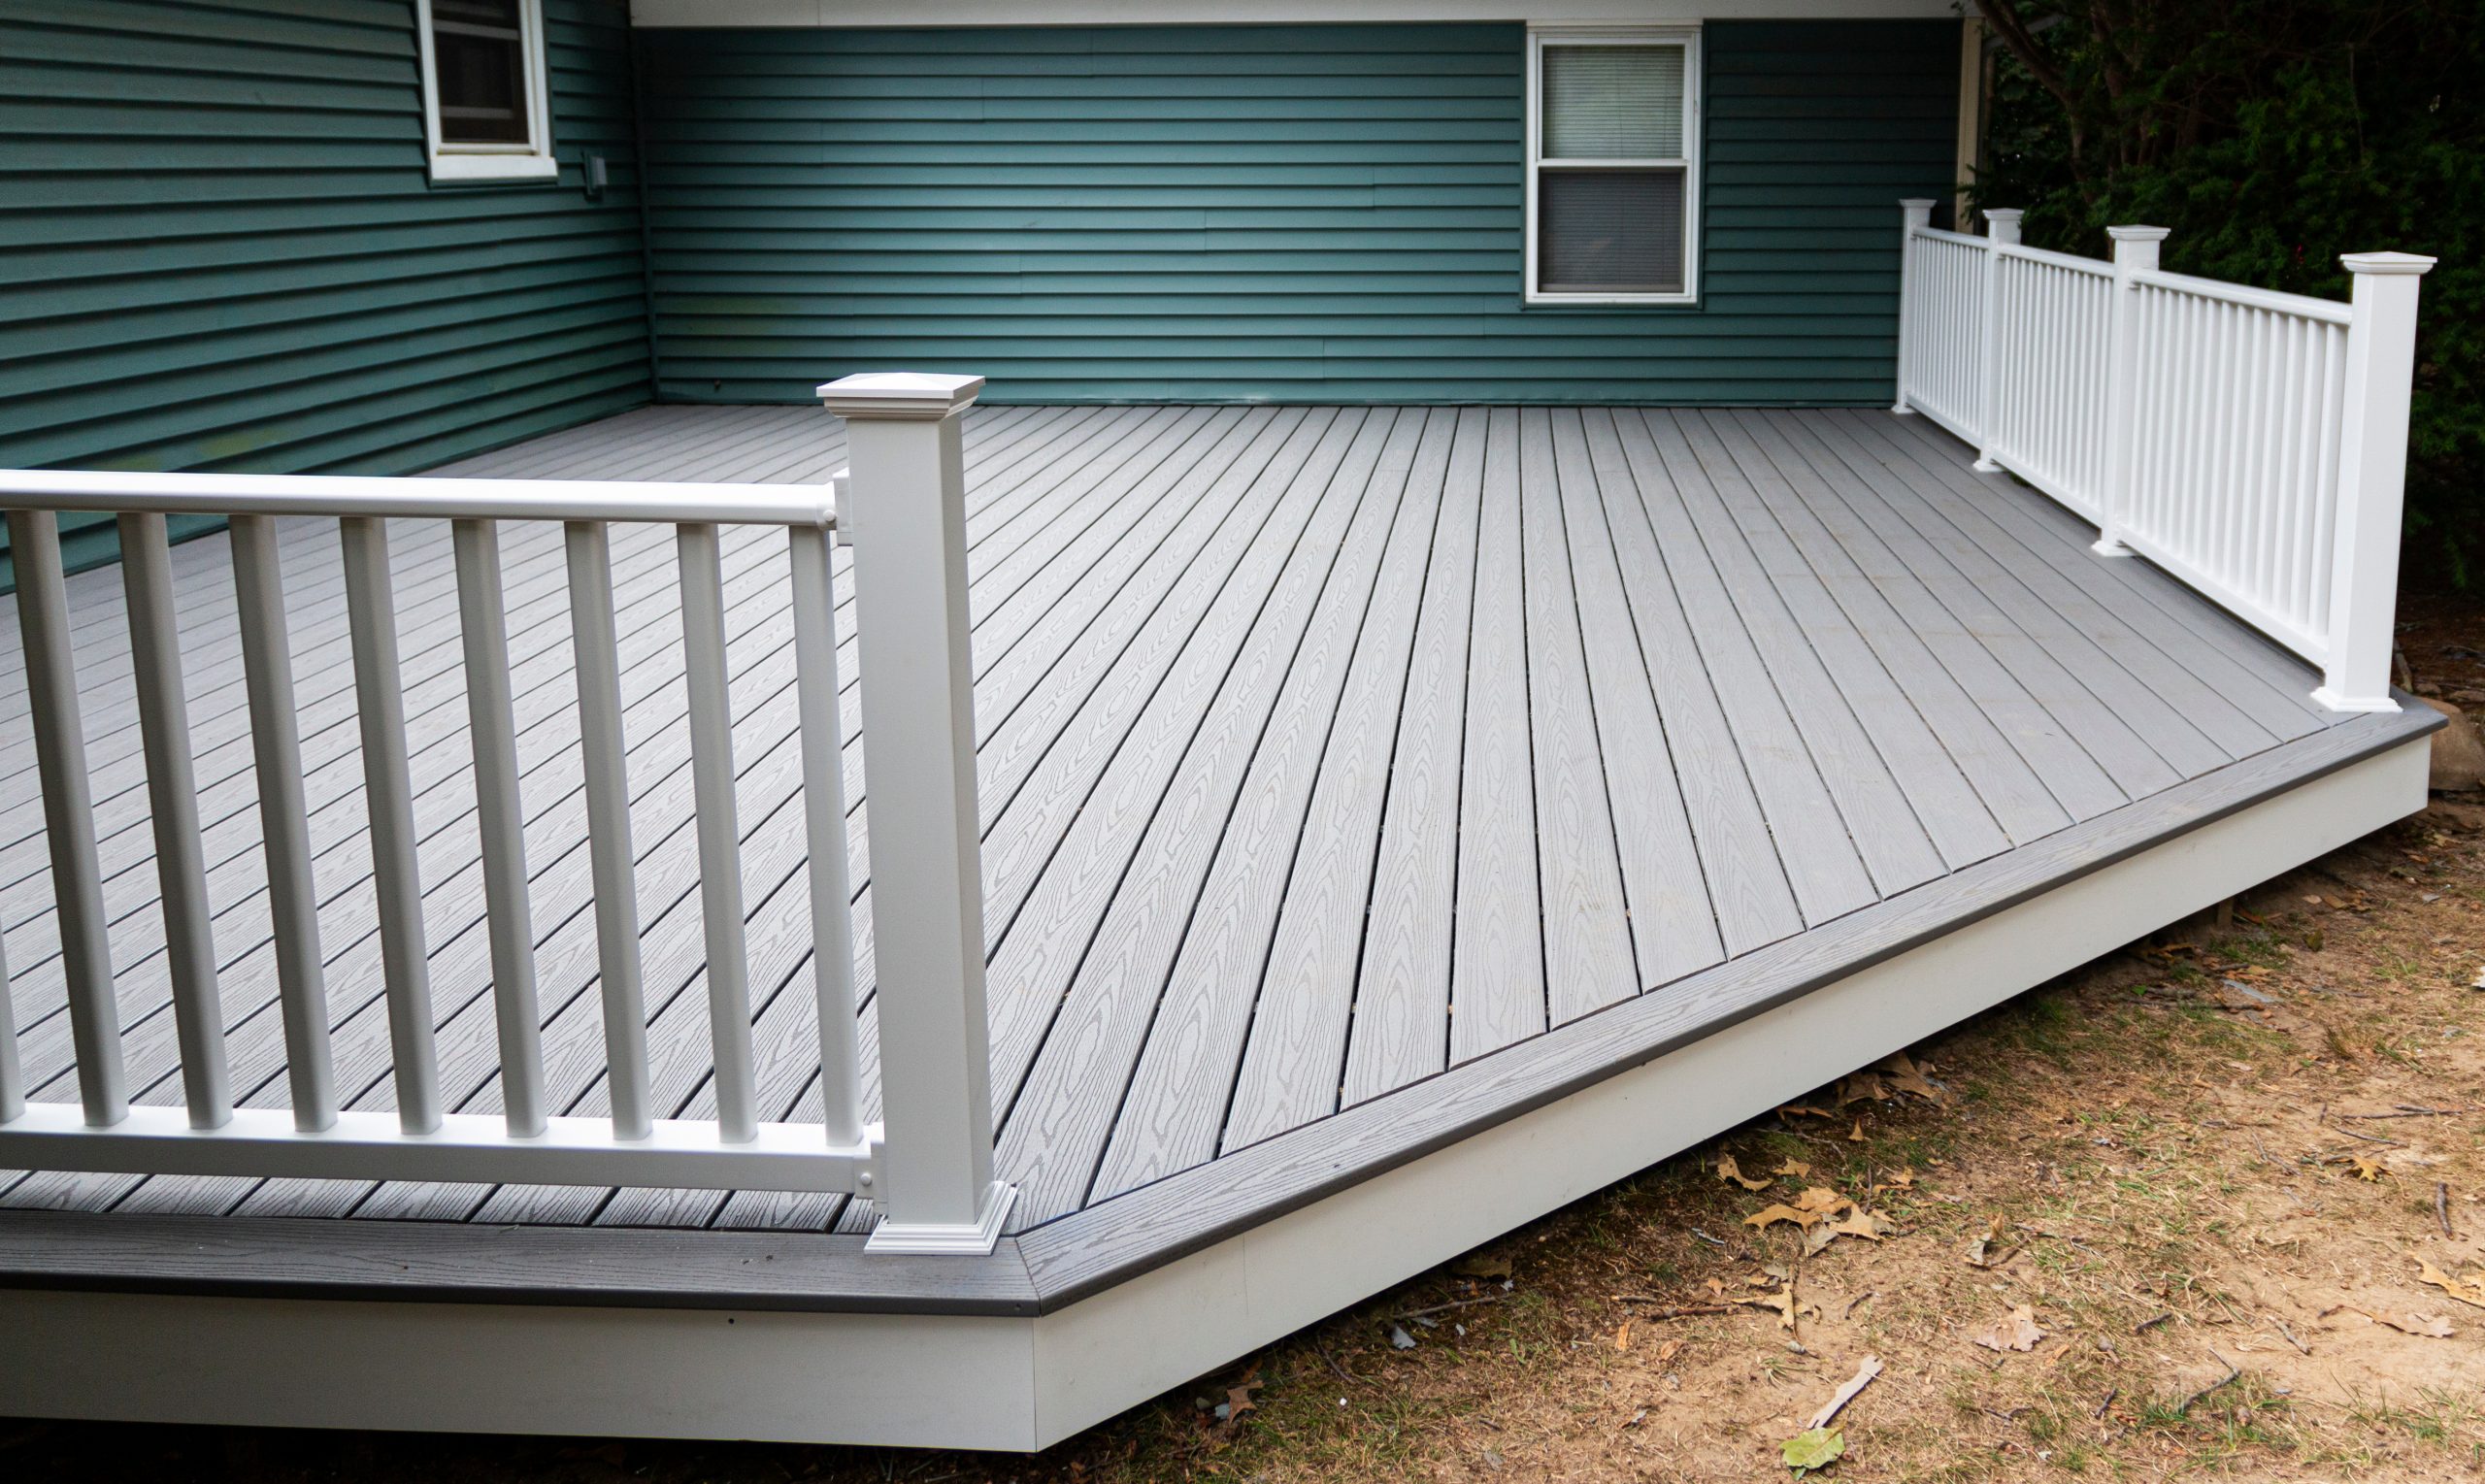 New,Composite,Deck,On,The,Back,Of,A,House,With